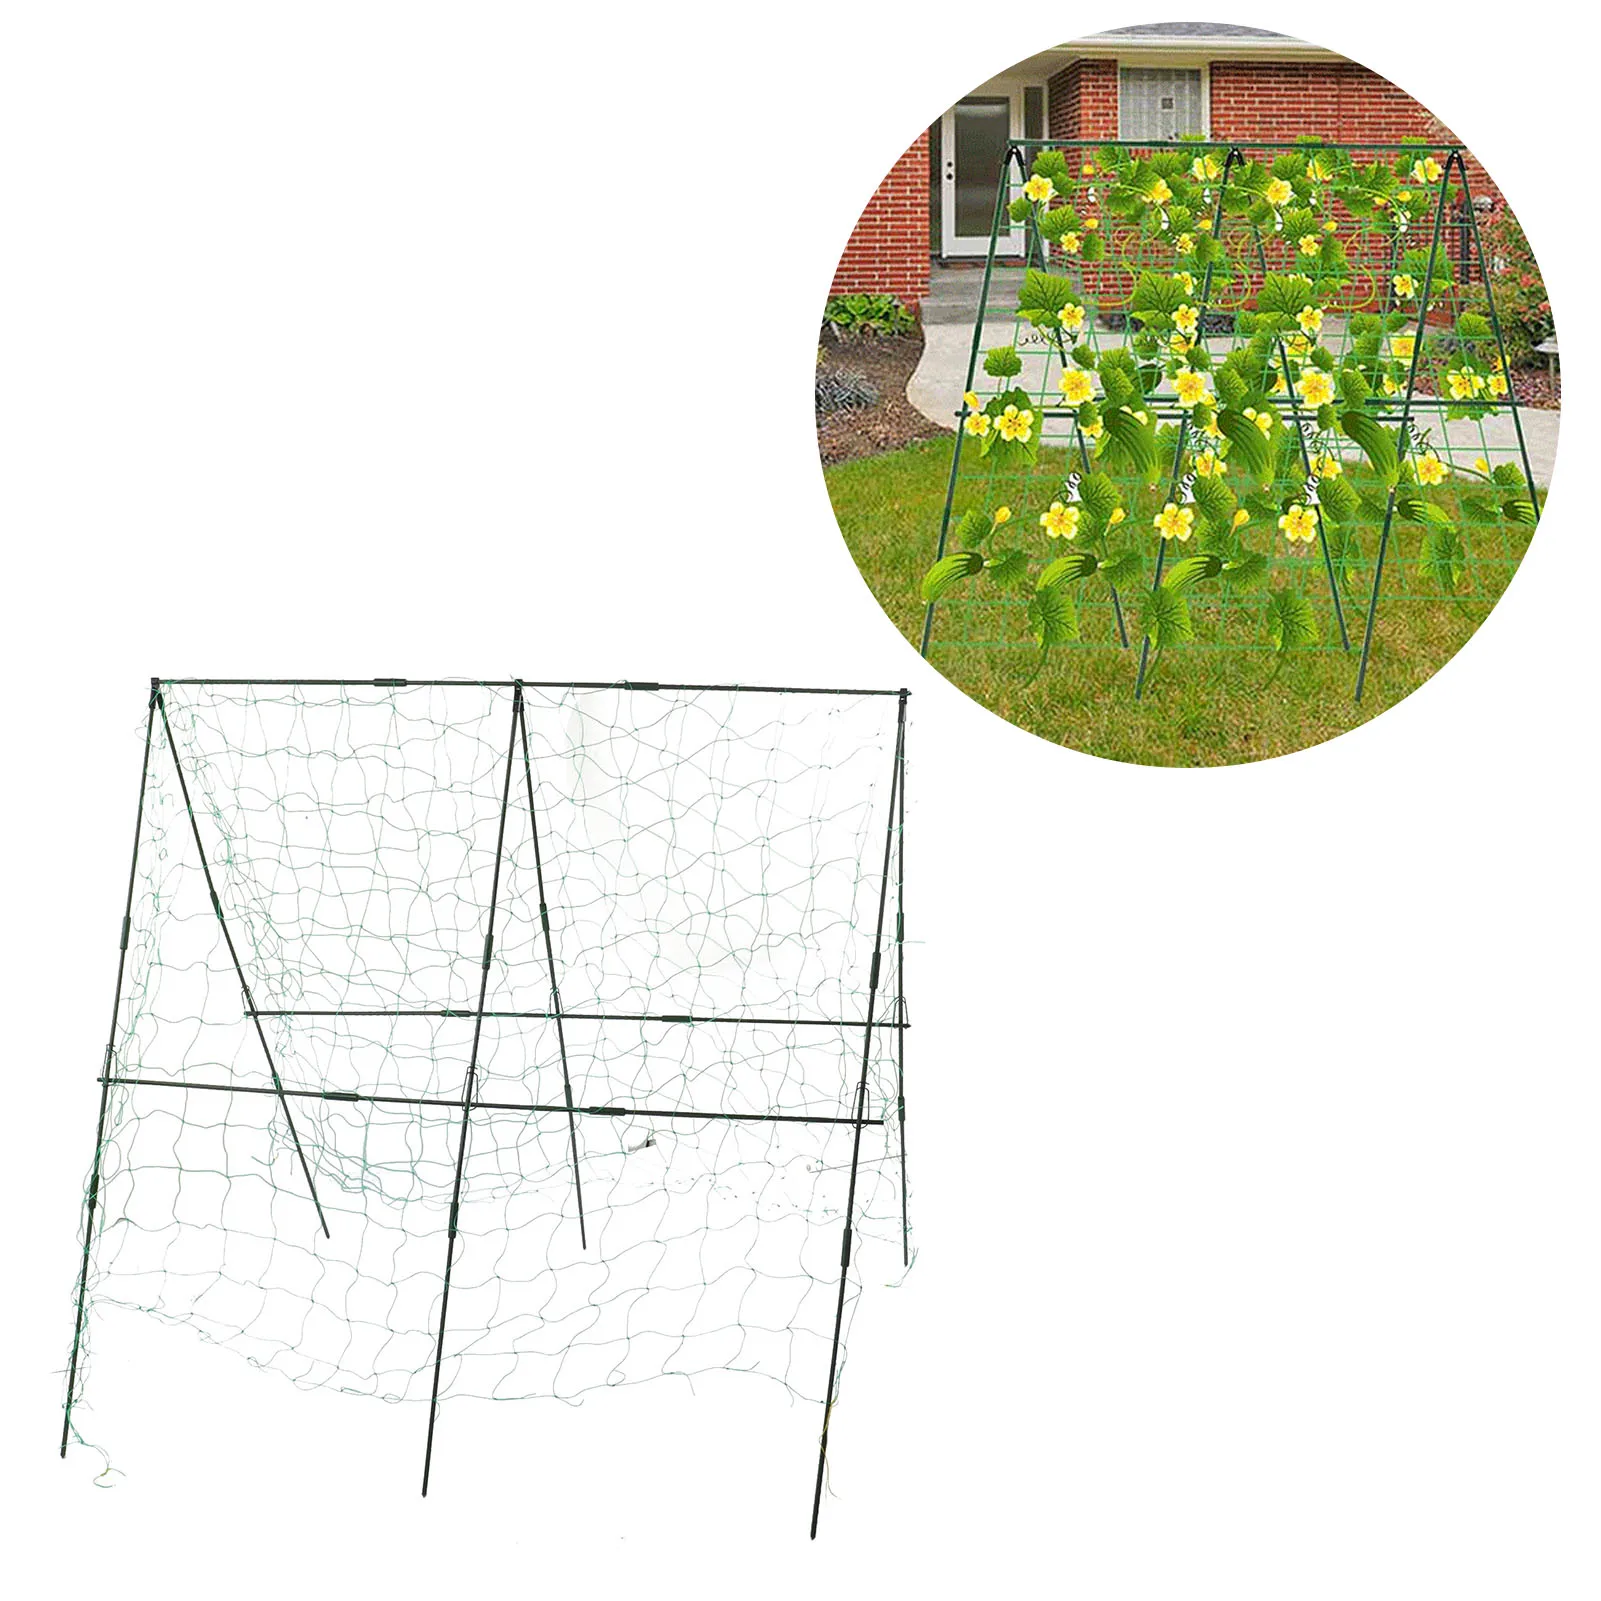 A Frame Plant Growing Support Metal Foldable Detachable Cucumber Climbing Net Set for Outdoor Garden Flowers Vegetables